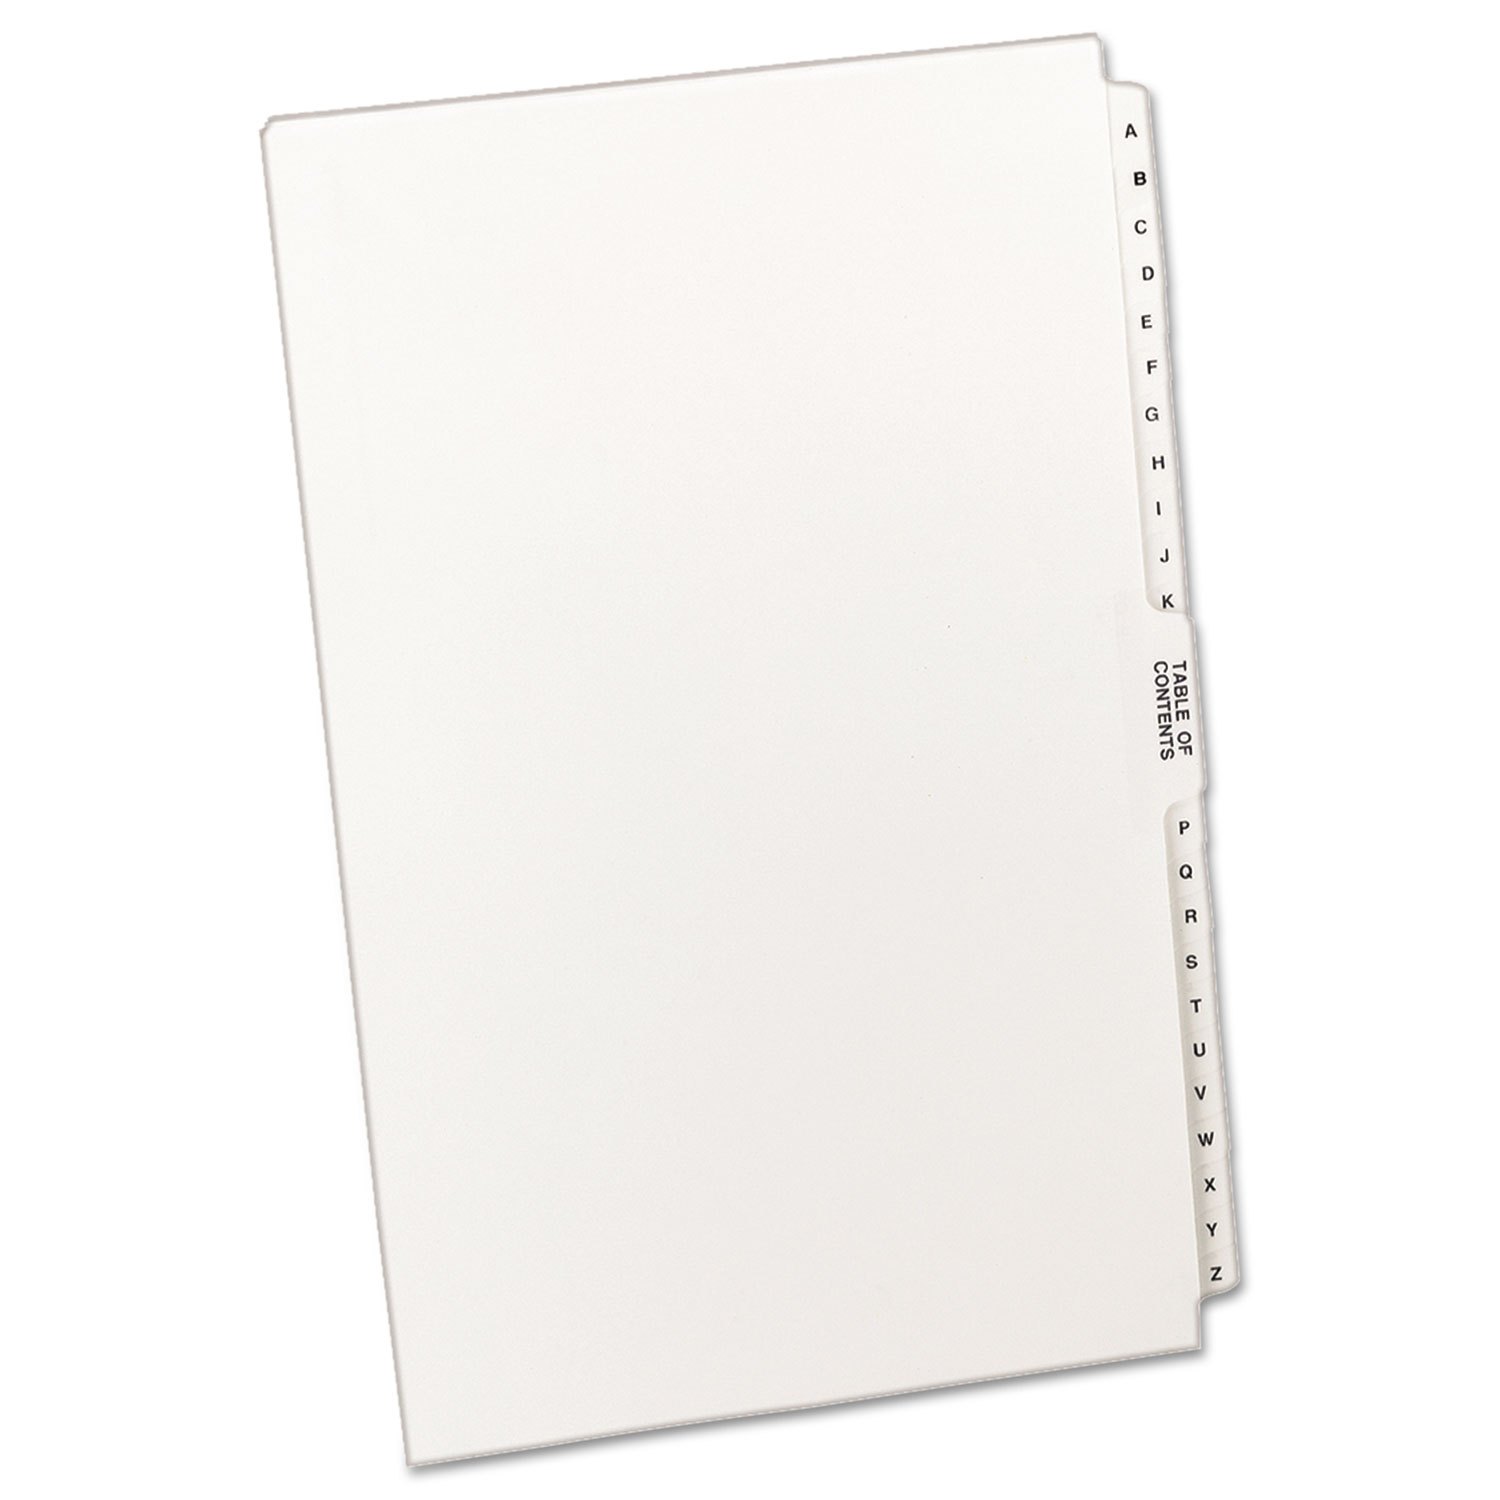  Avery 11375 Preprinted Legal Exhibit Side Tab Index Dividers, Avery Style, 27-Tab, A to Z, 14 x 8.5, White, 1 Set (AVE11375) 